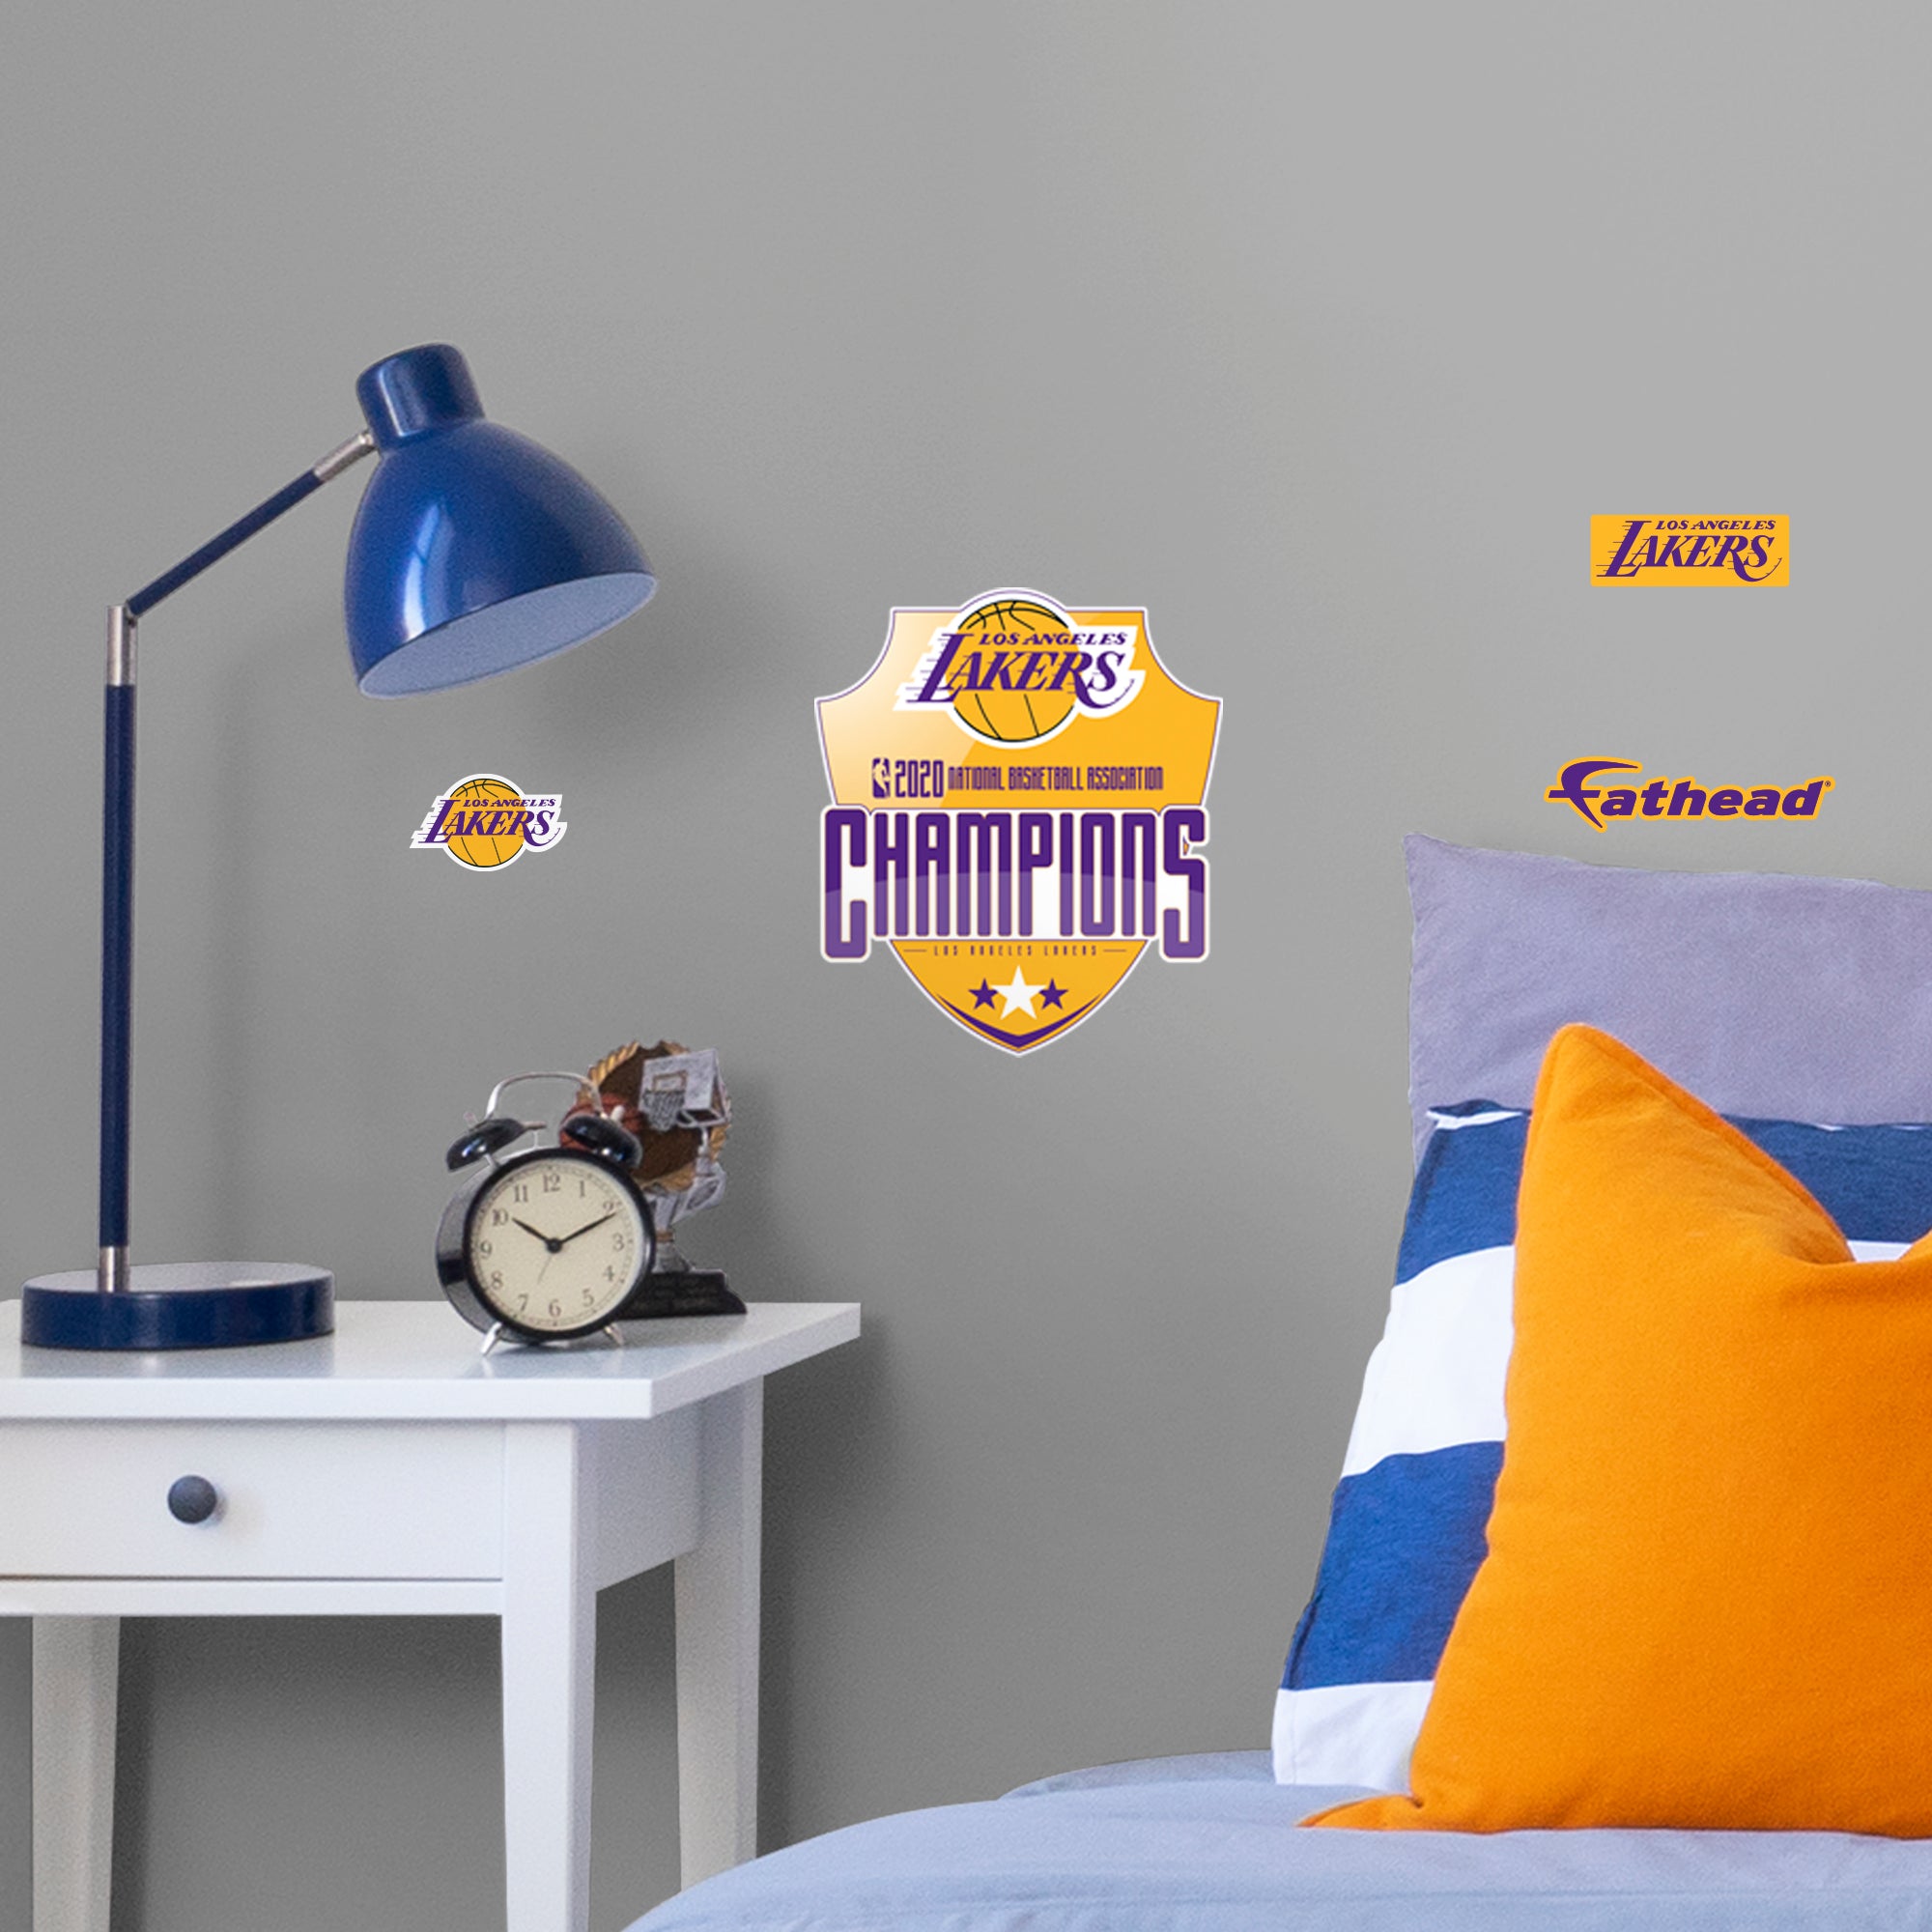 Los Angeles Lakers: 2020 Champions Logo - Officially Licensed NBA Removable Wall Decal Large by Fathead | Vinyl